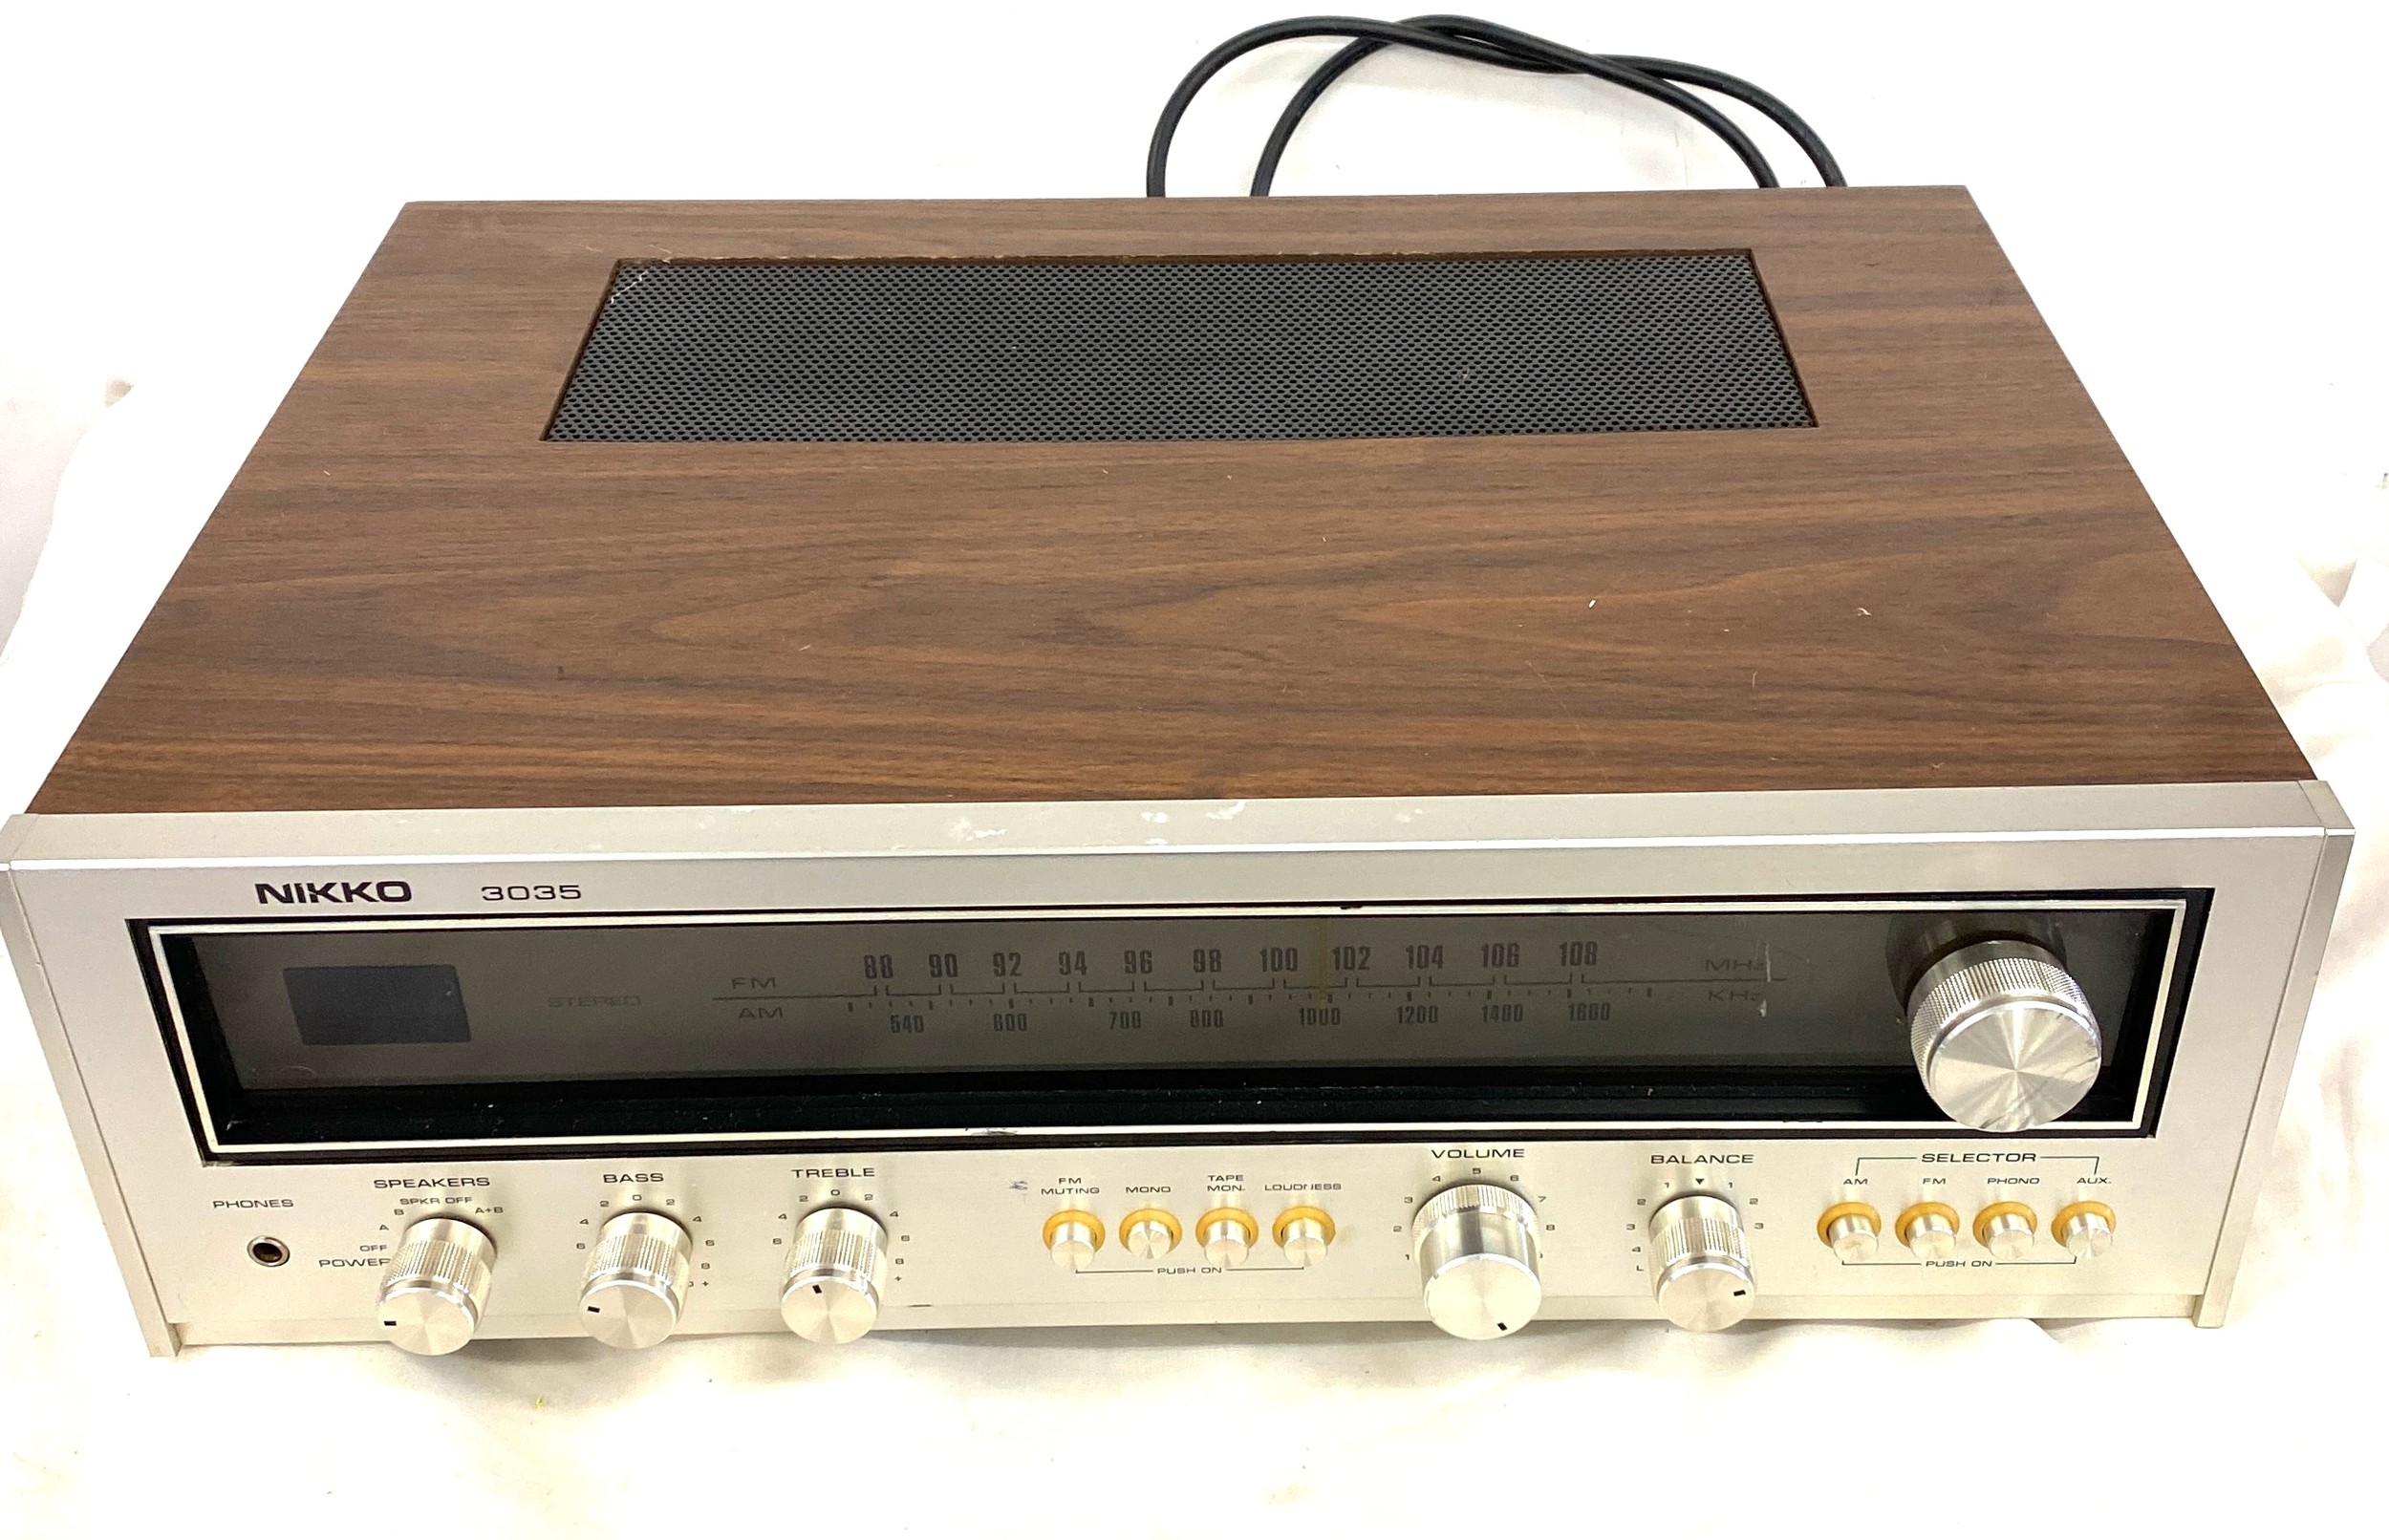 Nikko Stereo receiver model no 3035- tested in working order